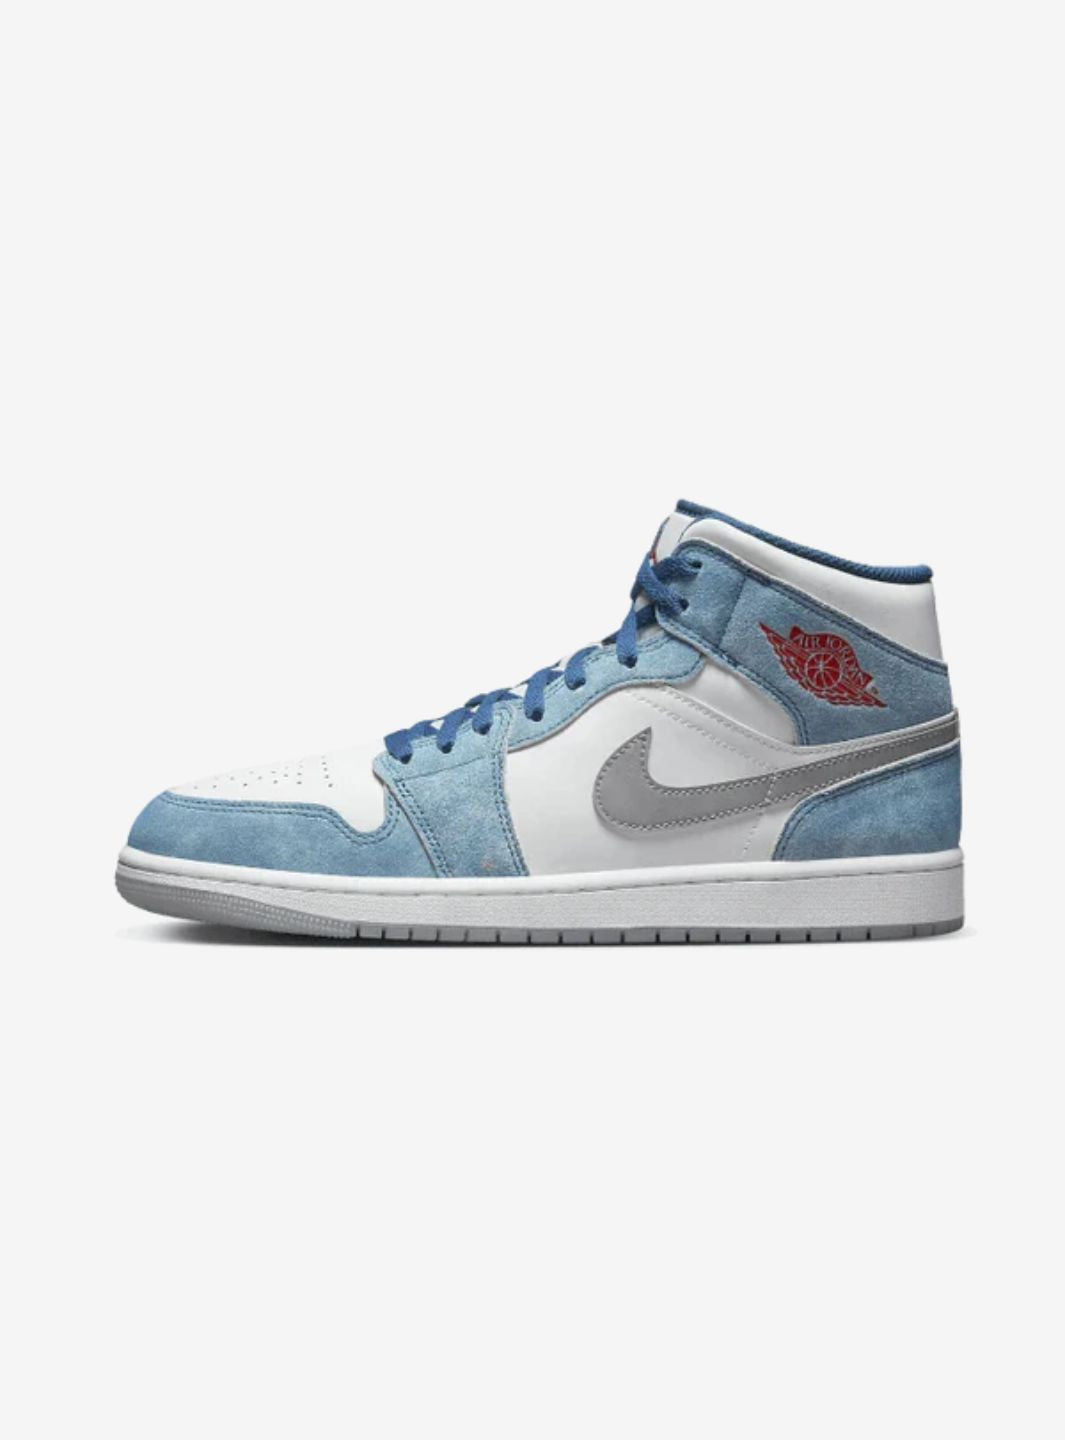 Air Jordan 1 Mid French Blue Fire Red - DN3706-401 | ResellZone